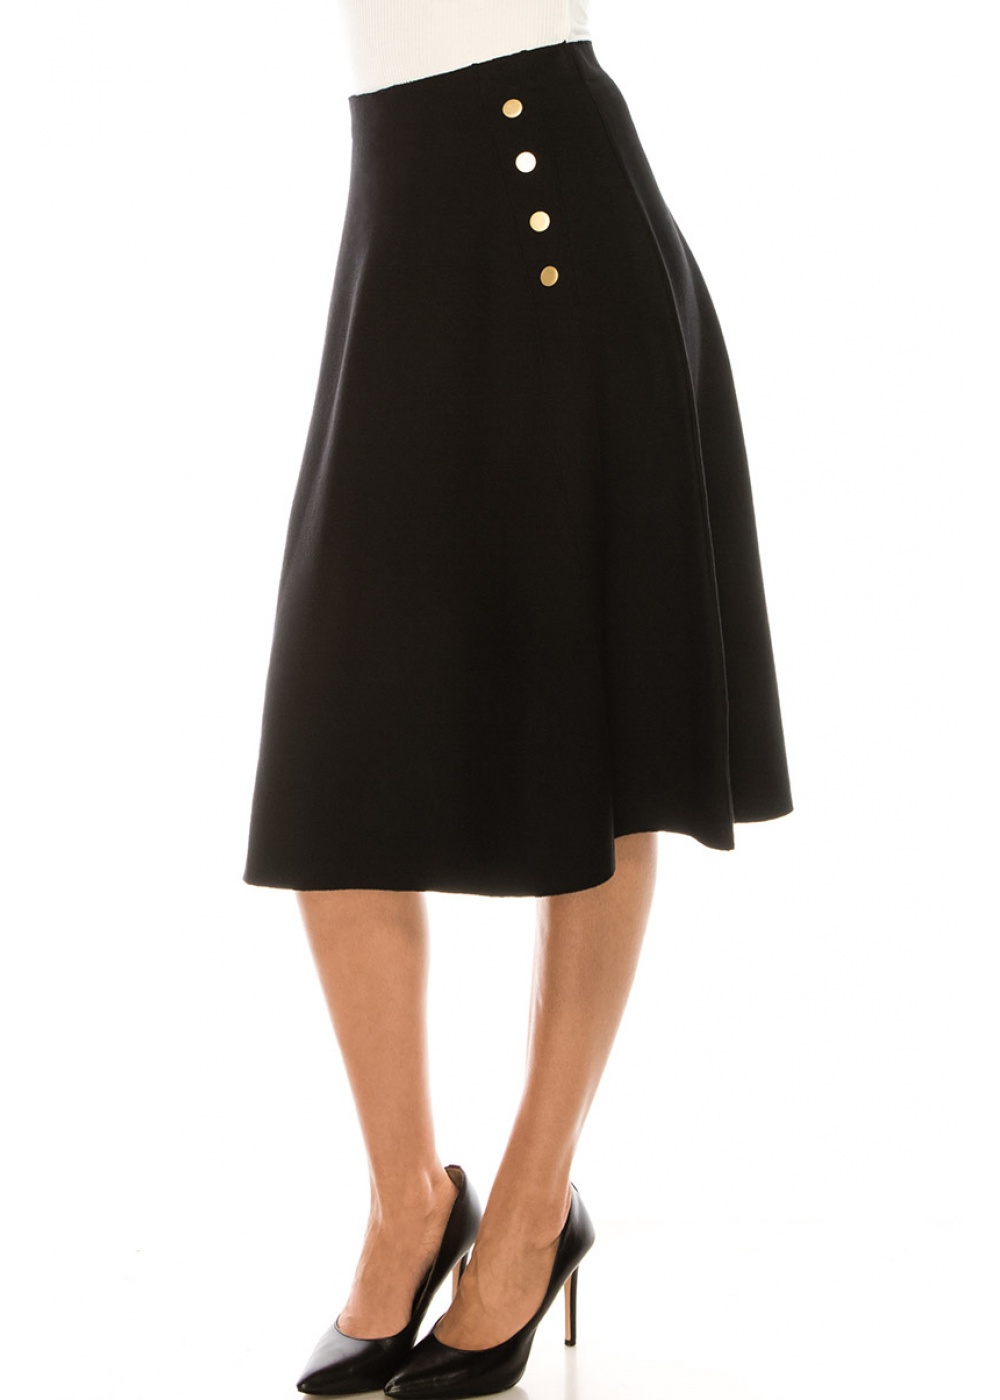 Stylish Black Midi Skirt With Buttons Details